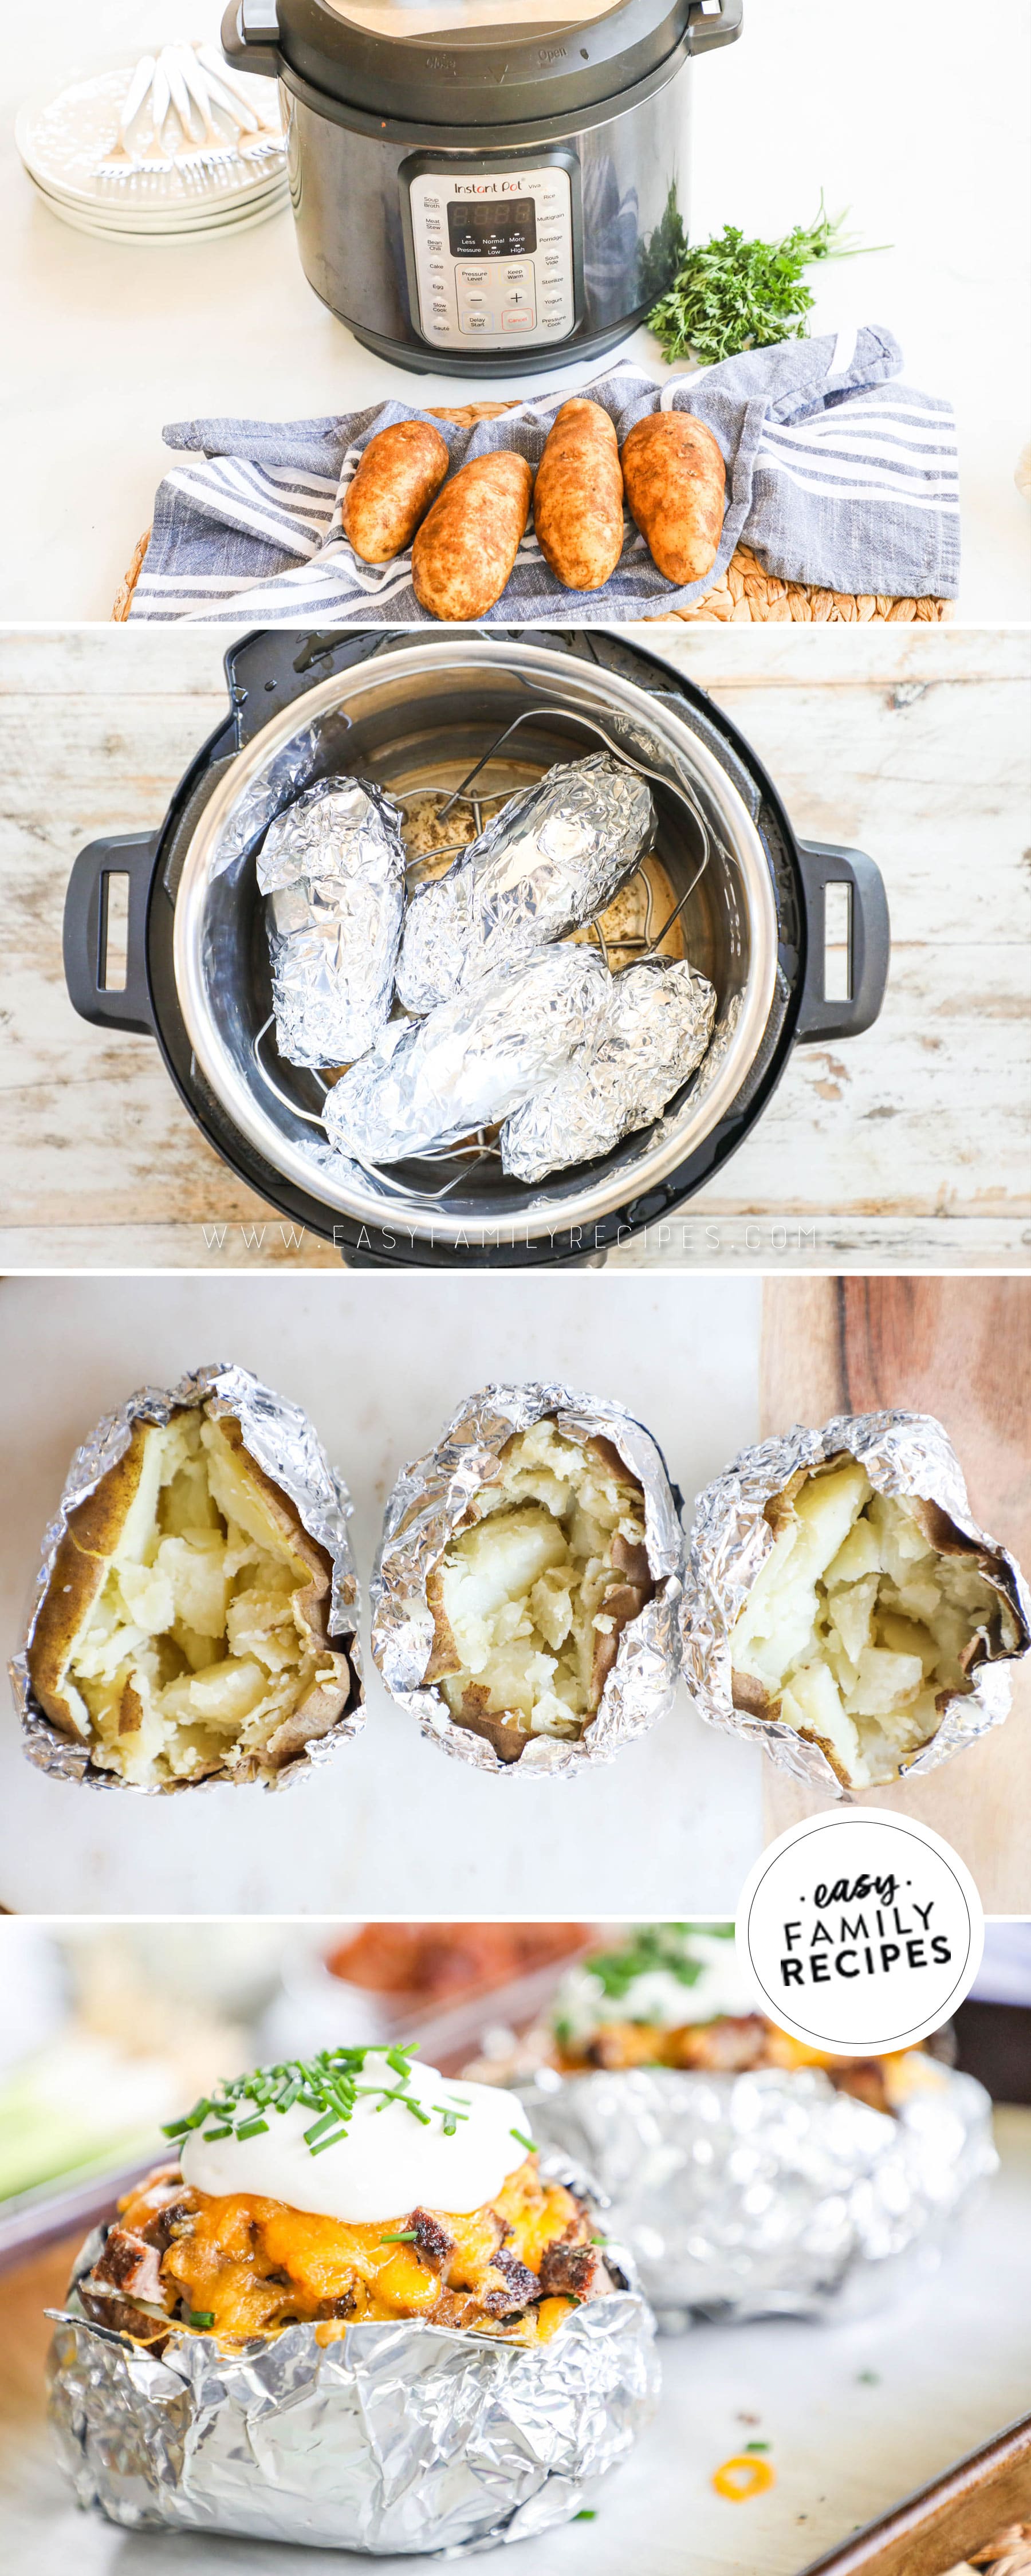 Steps to make baked potatoes step 1 wrap each in foil step 2 lay on a trivet in the instant pot step 3 unwrap potatoes step 4 top with everything you love!